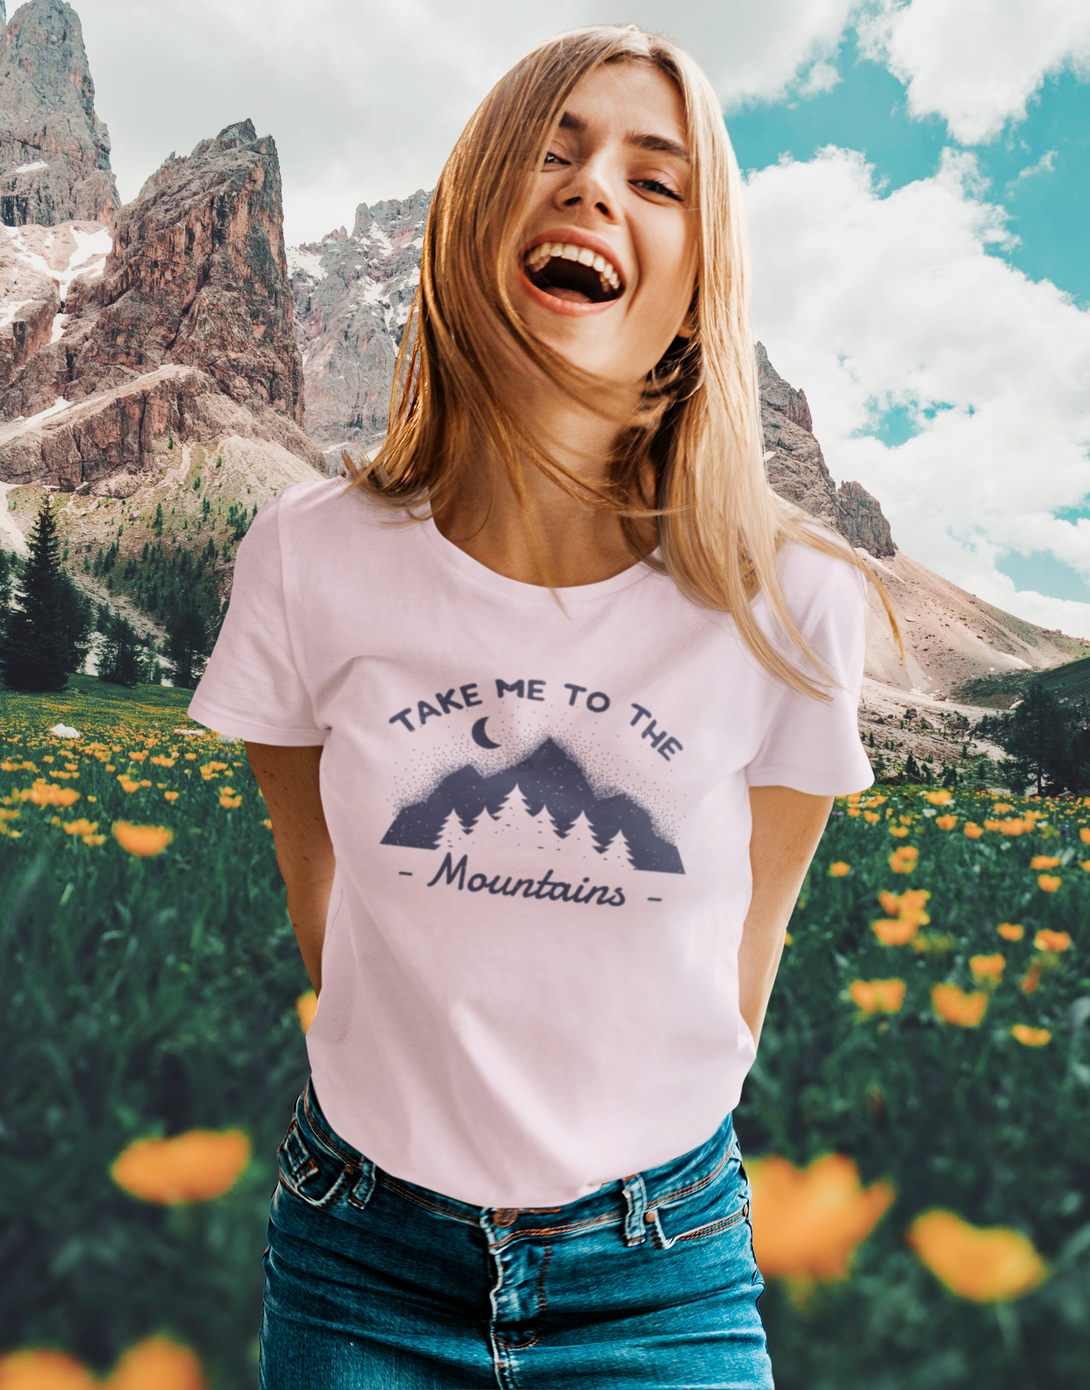 Take Me To The Mountains Printed T-Shirt For Women - WowWaves - 3